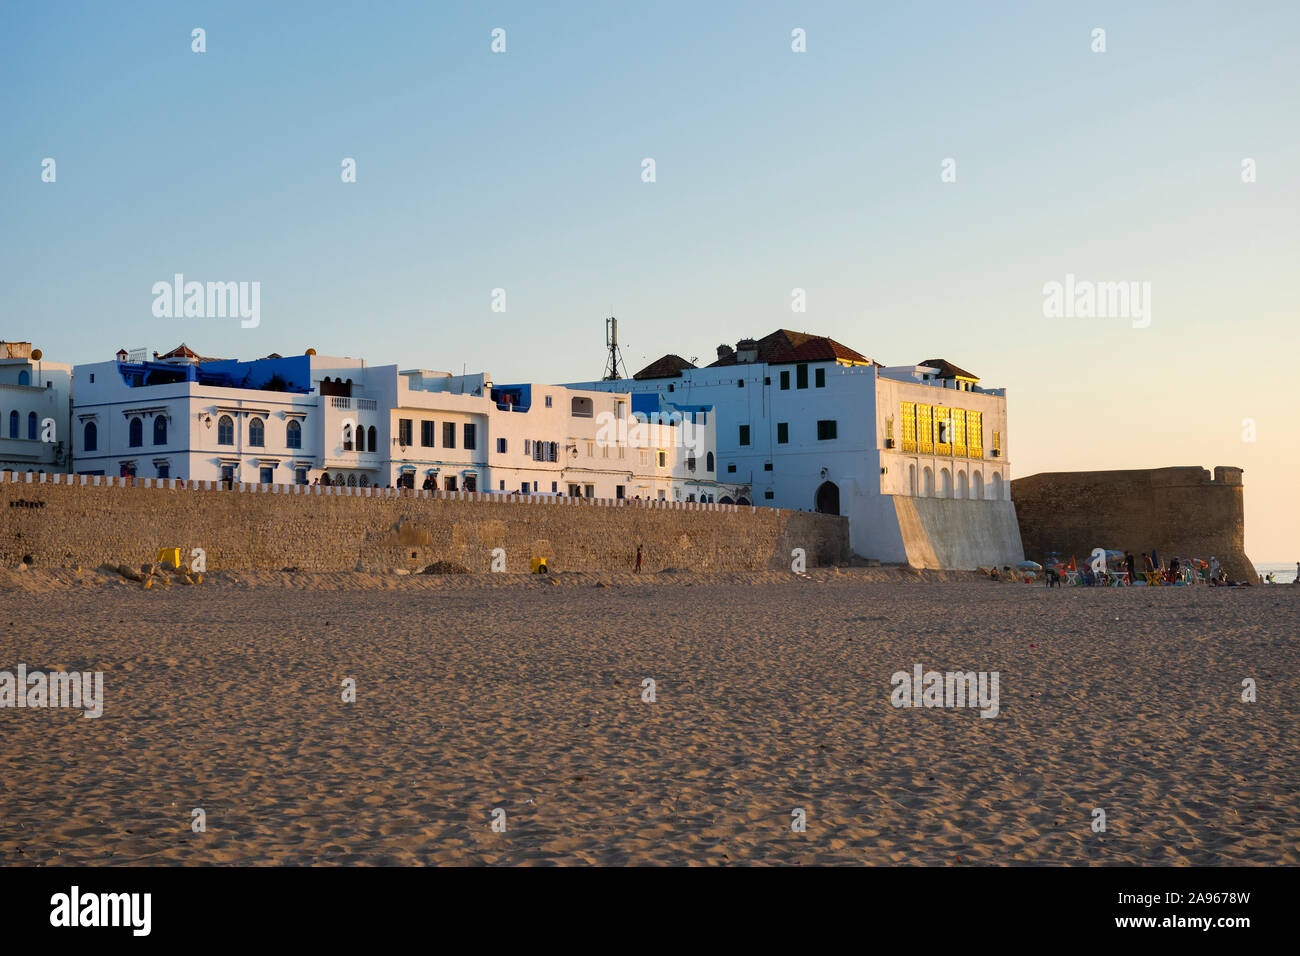 Asilah, Morocco-September 10, 2019: View from the beach to the old stone fortification wall of the medina from Asilah, Morocco late in the afternoon Stock Photo